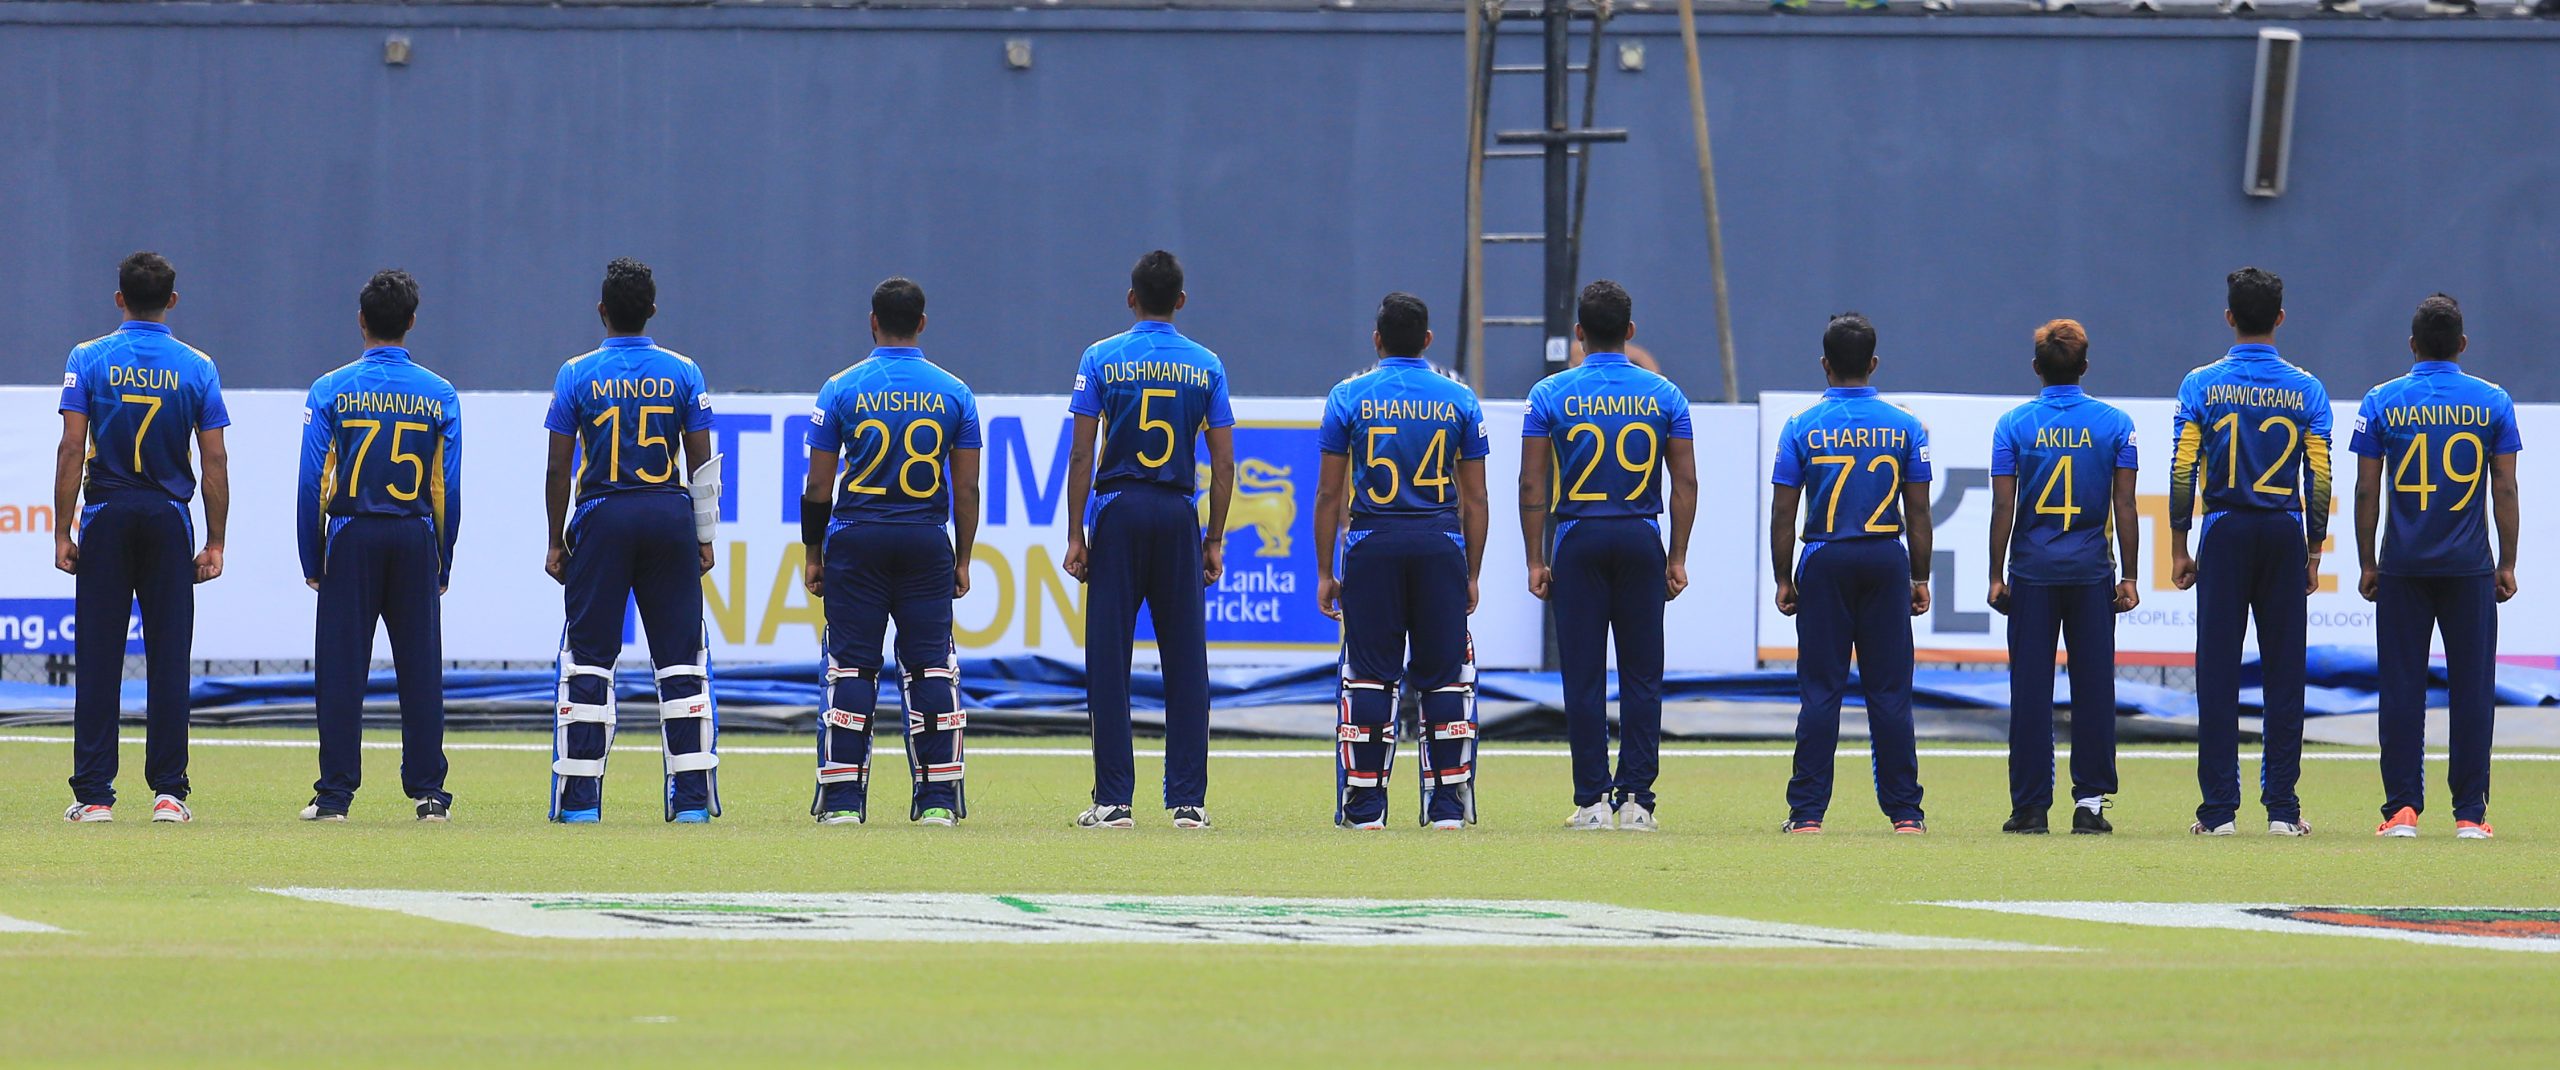 Sri Lanka’s 15 member squad for the ICC T20 World Cup 2021